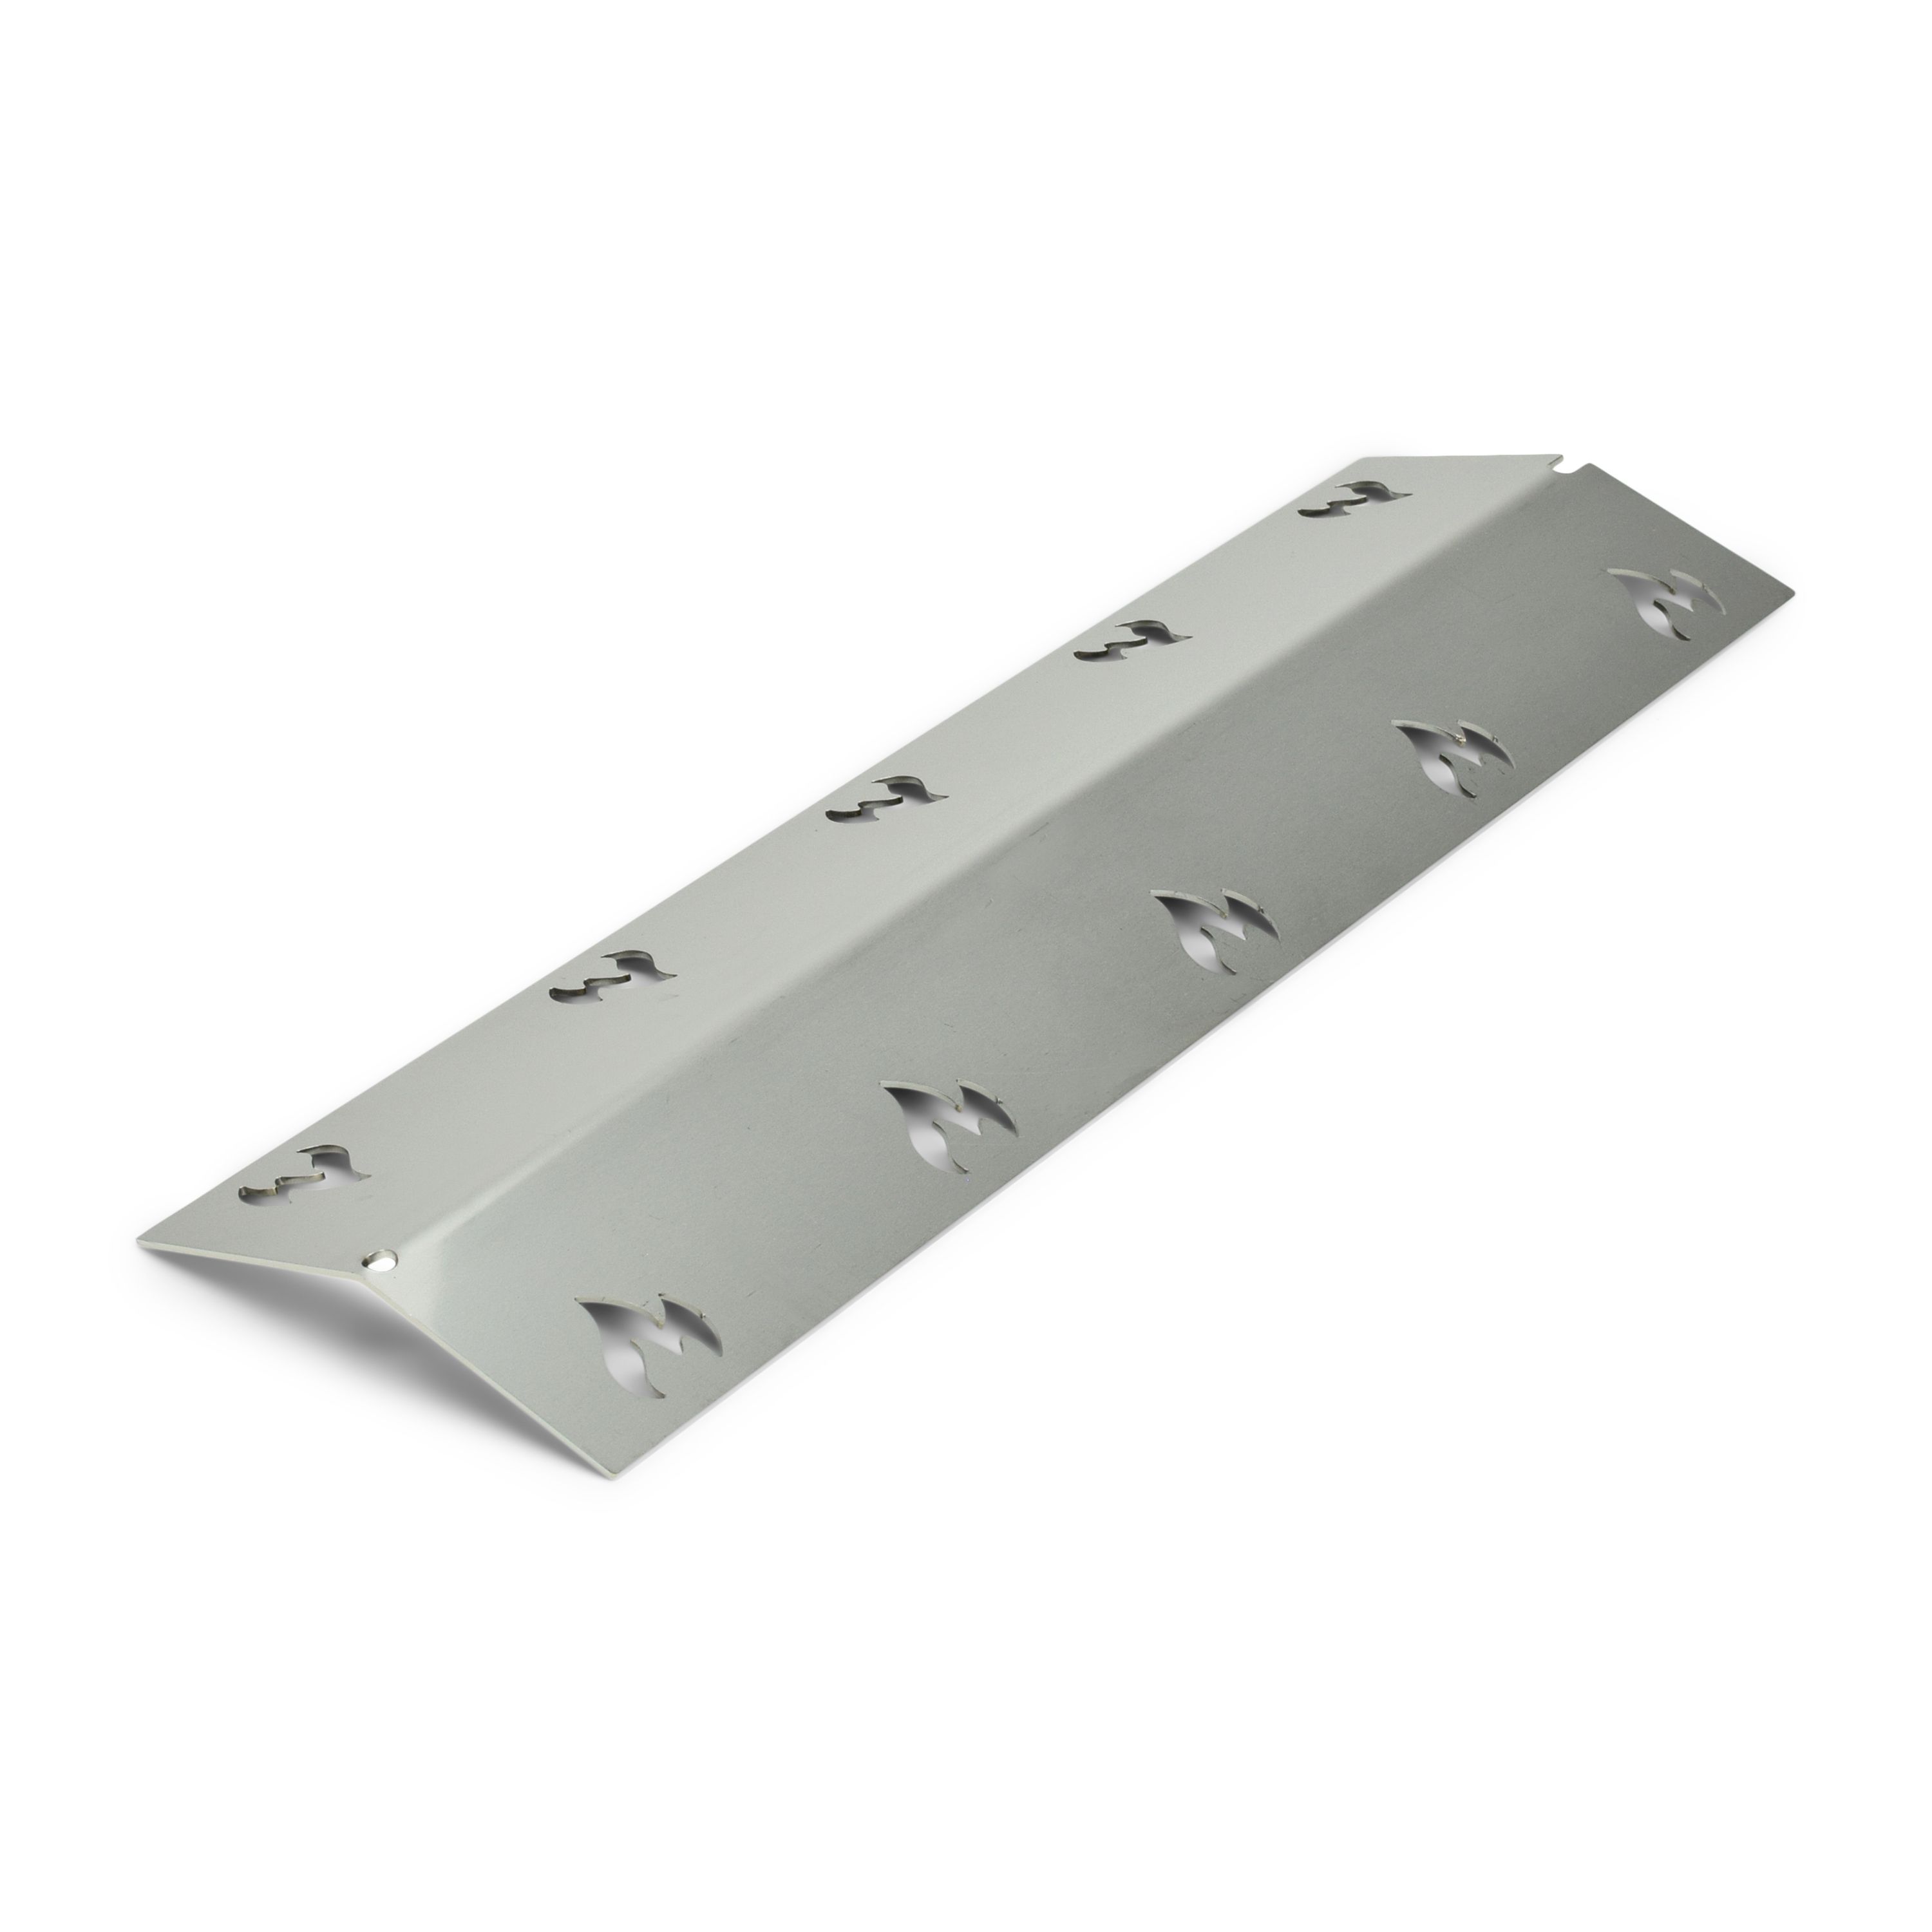 Stainless steel burner cover 35 x 10.5 cm Replacement aroma rail outlives your barbecue